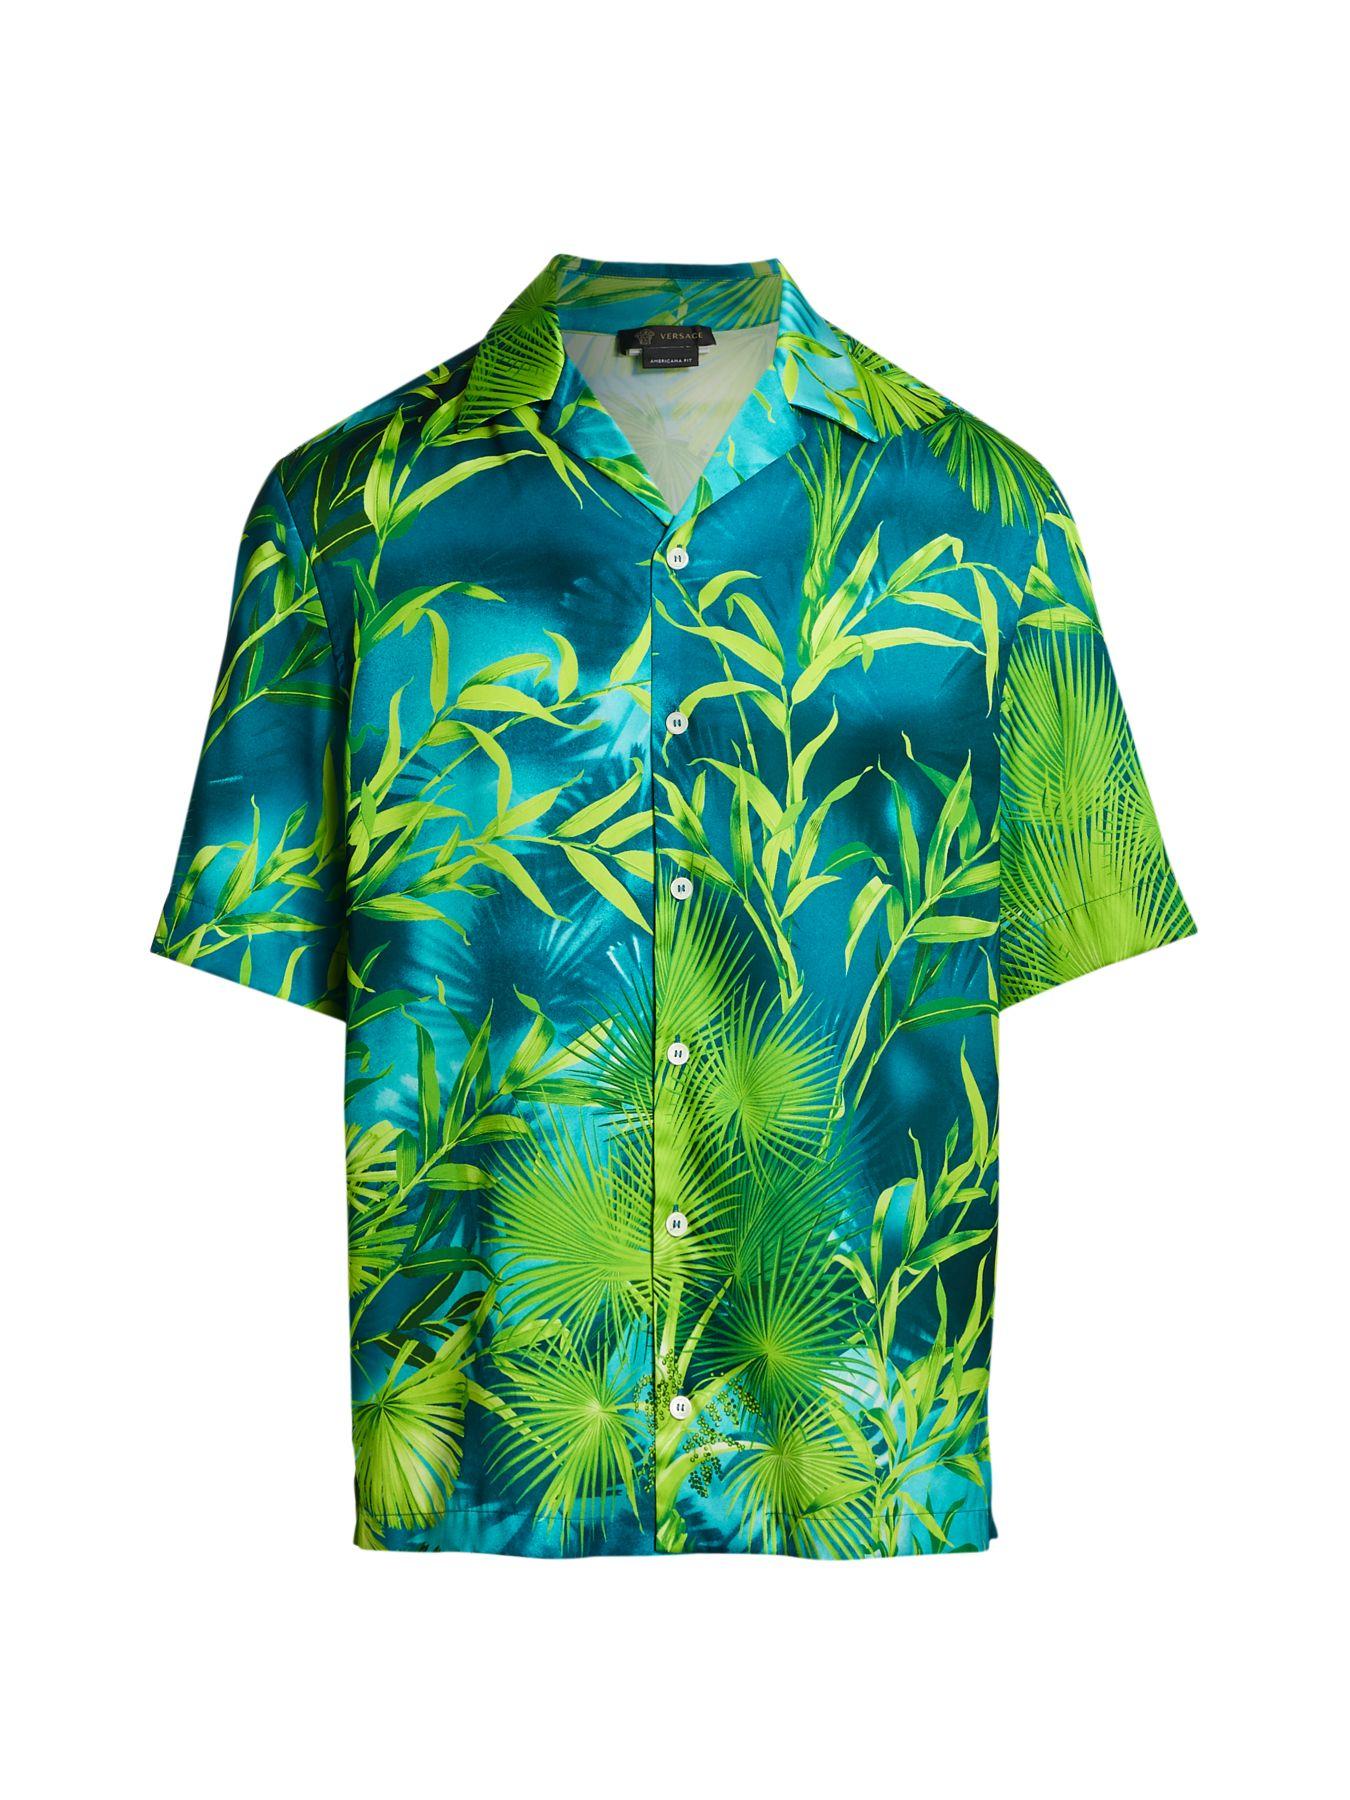 Versace Synthetic 'jungle' Shirt in Green for Men - Save 31% - Lyst